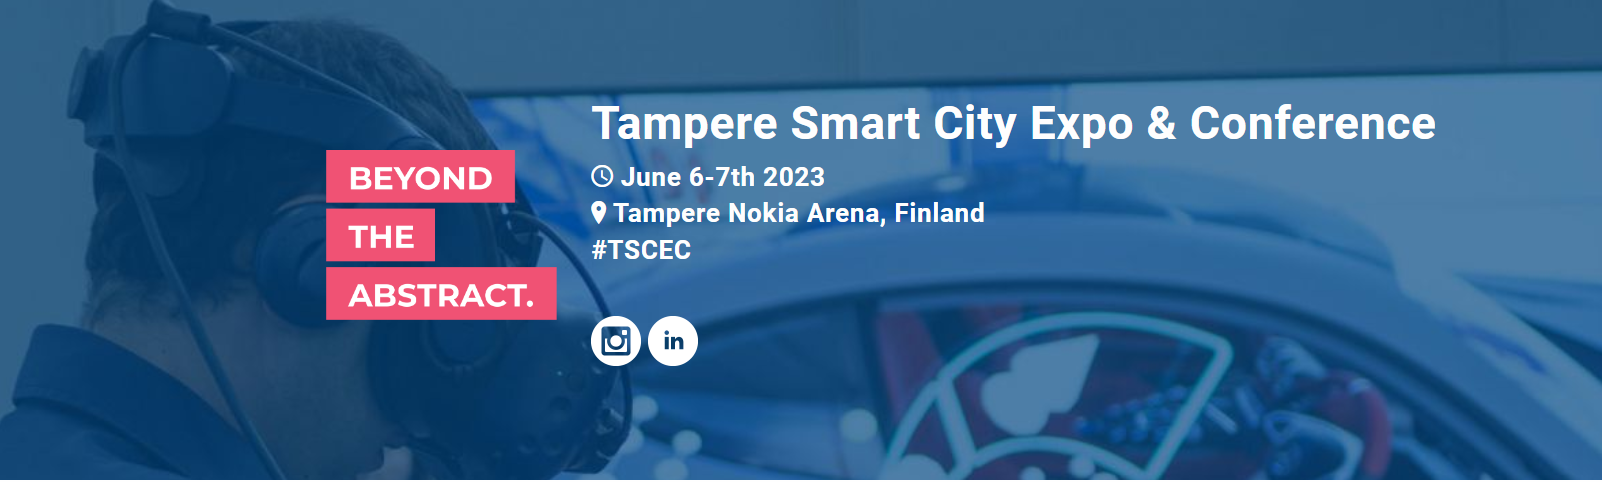 Tampere Smart City Expo 2023